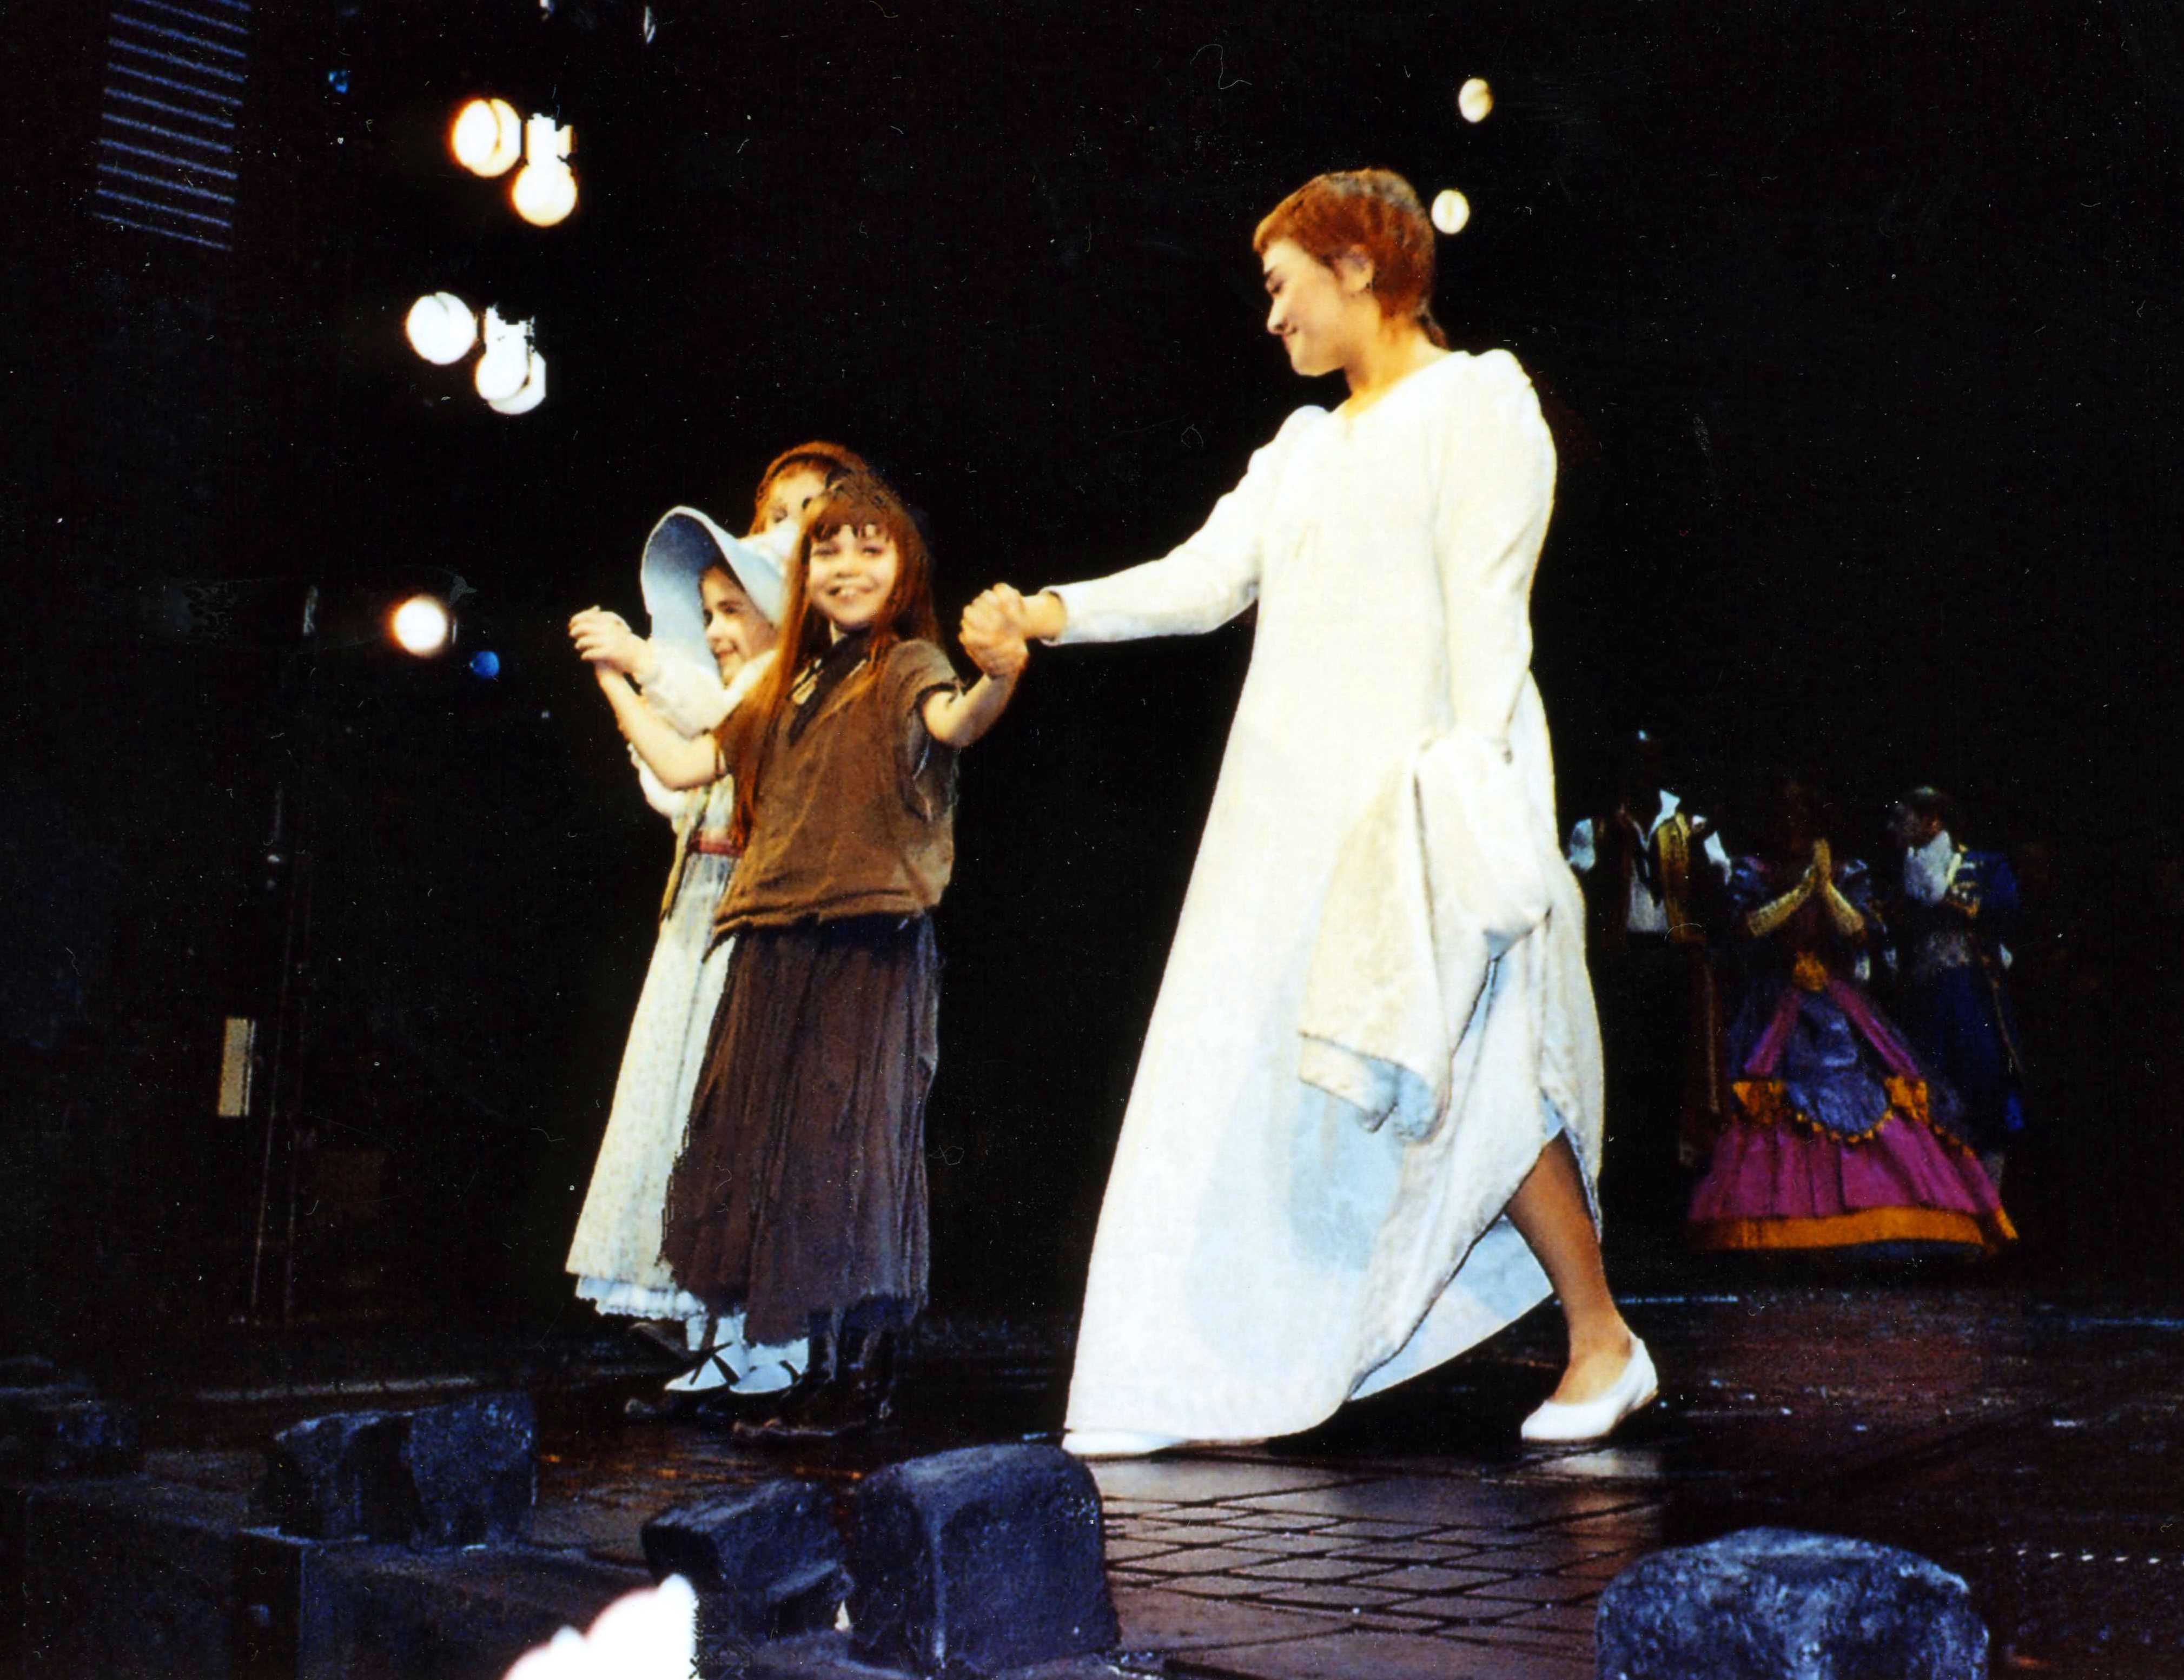 Adrianna Bertola as Young Cosette in 'Les Miserables' at The Queens Theatre, London, West End.